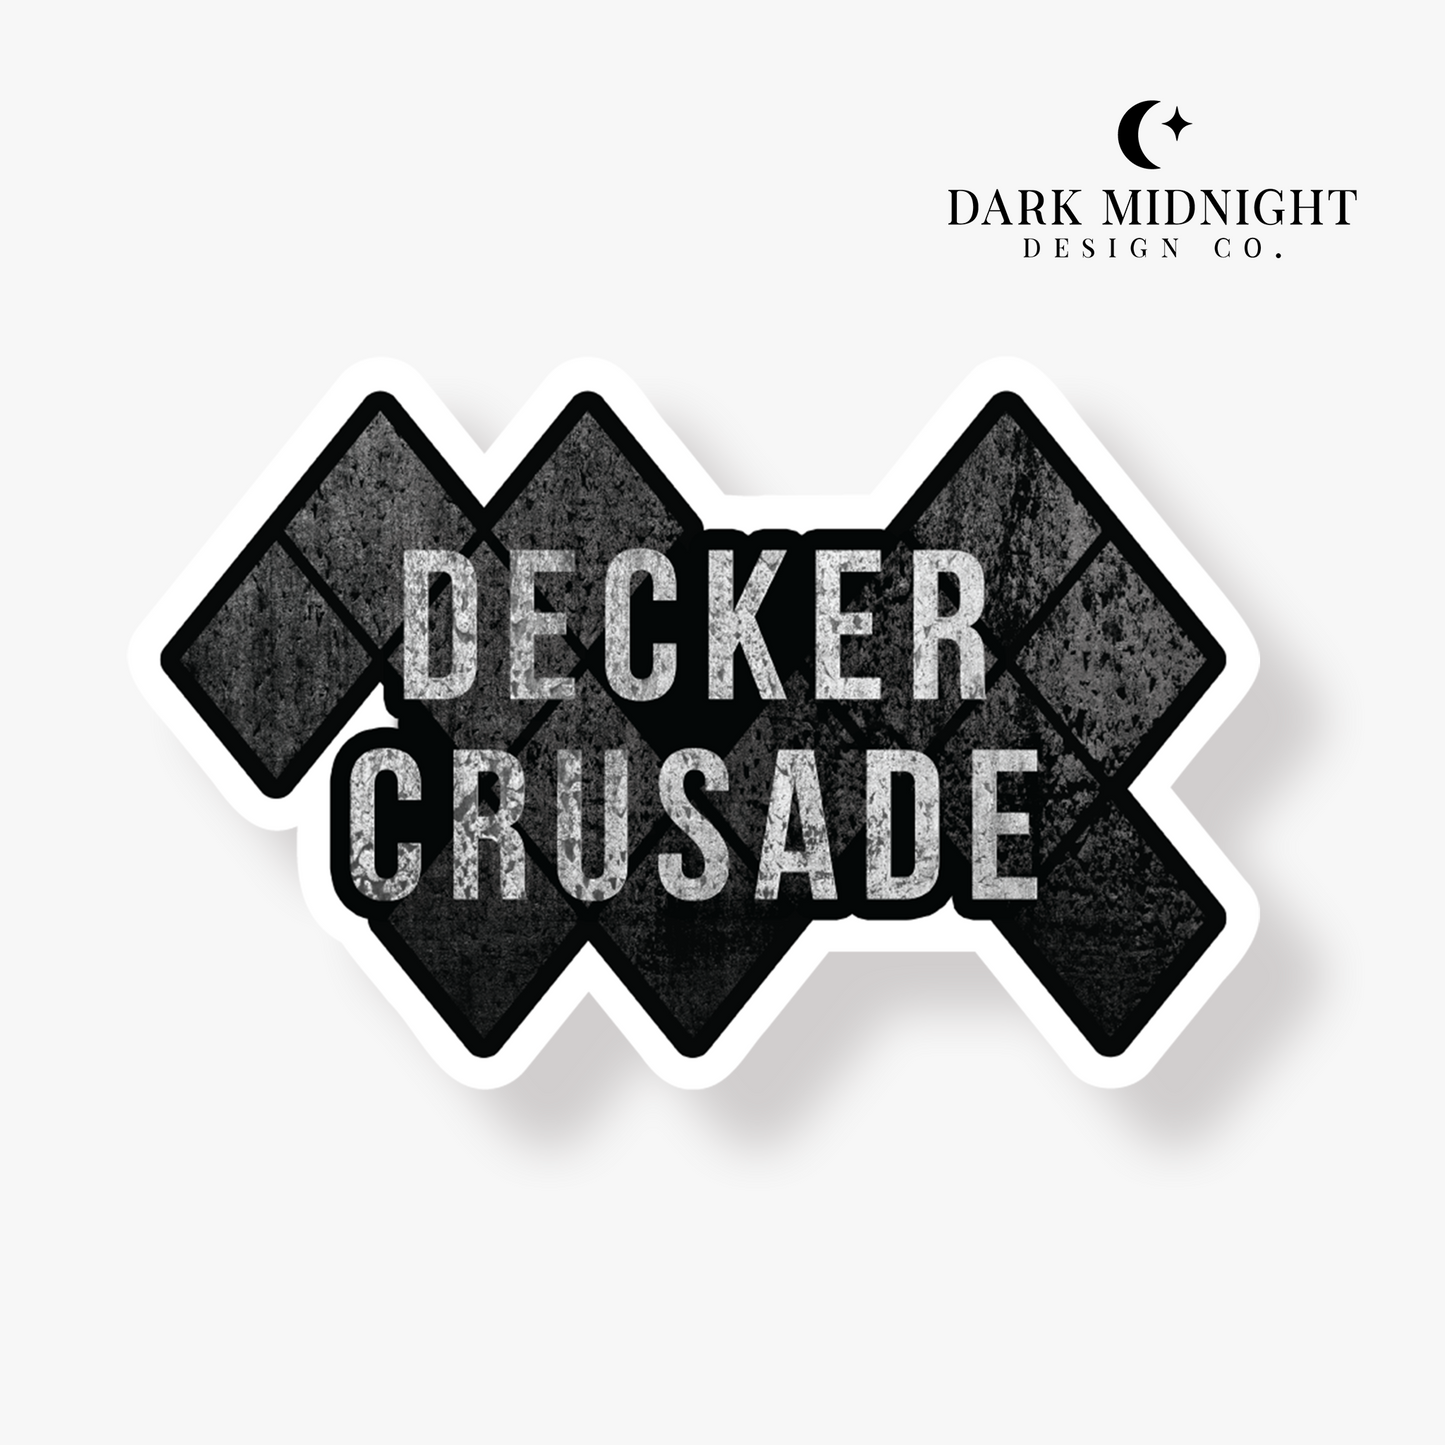 Decker Crusade Sticker - Officially Licensed Boys of Lake Chapel Series